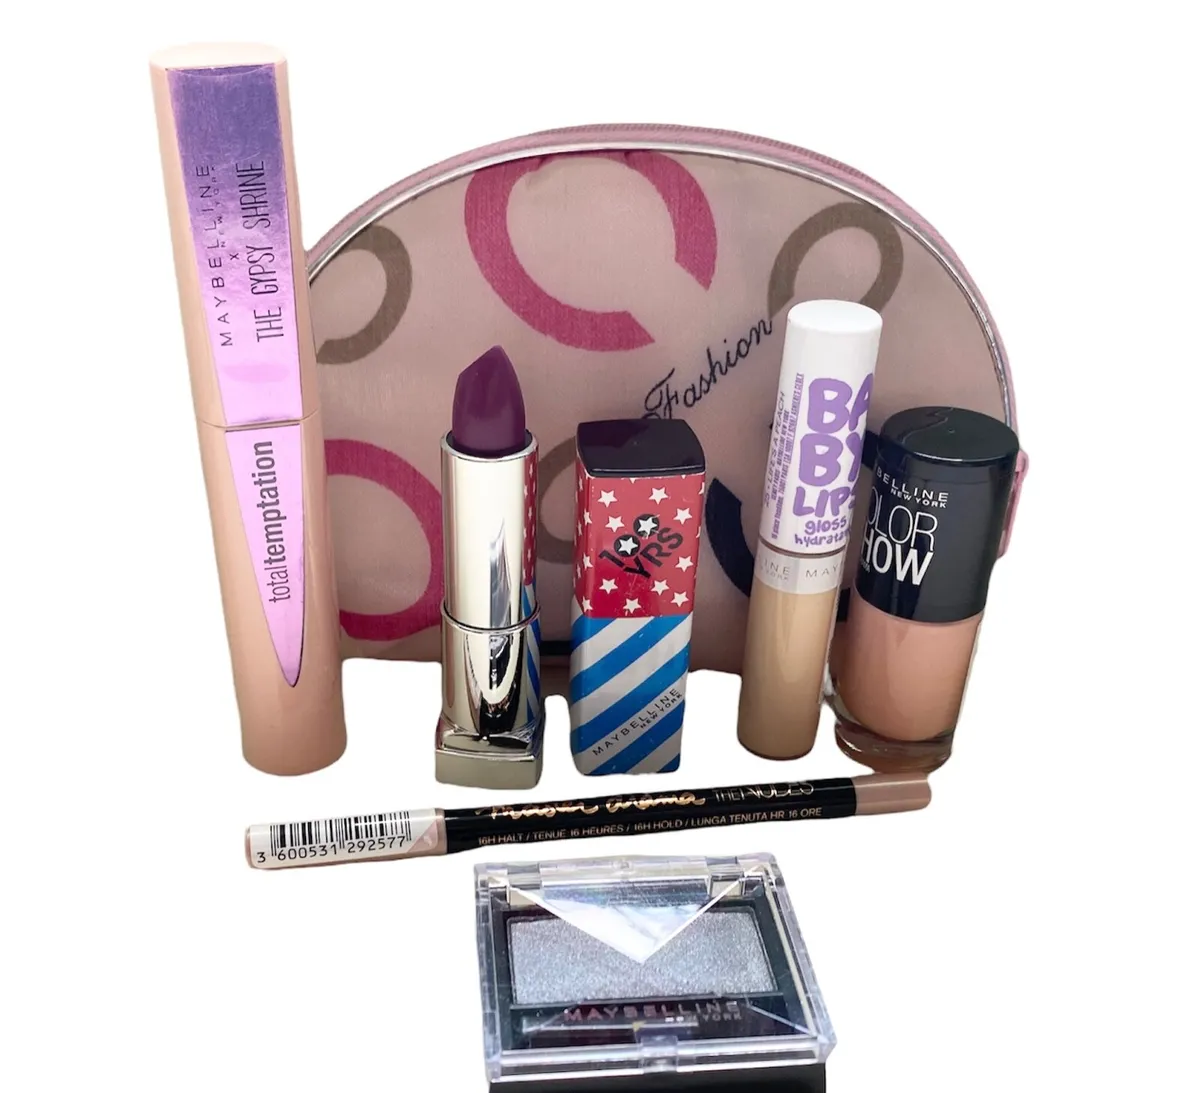 Maybelline Gift Set Make Up Bag Gifts for Her 7pc Set Cosmetics